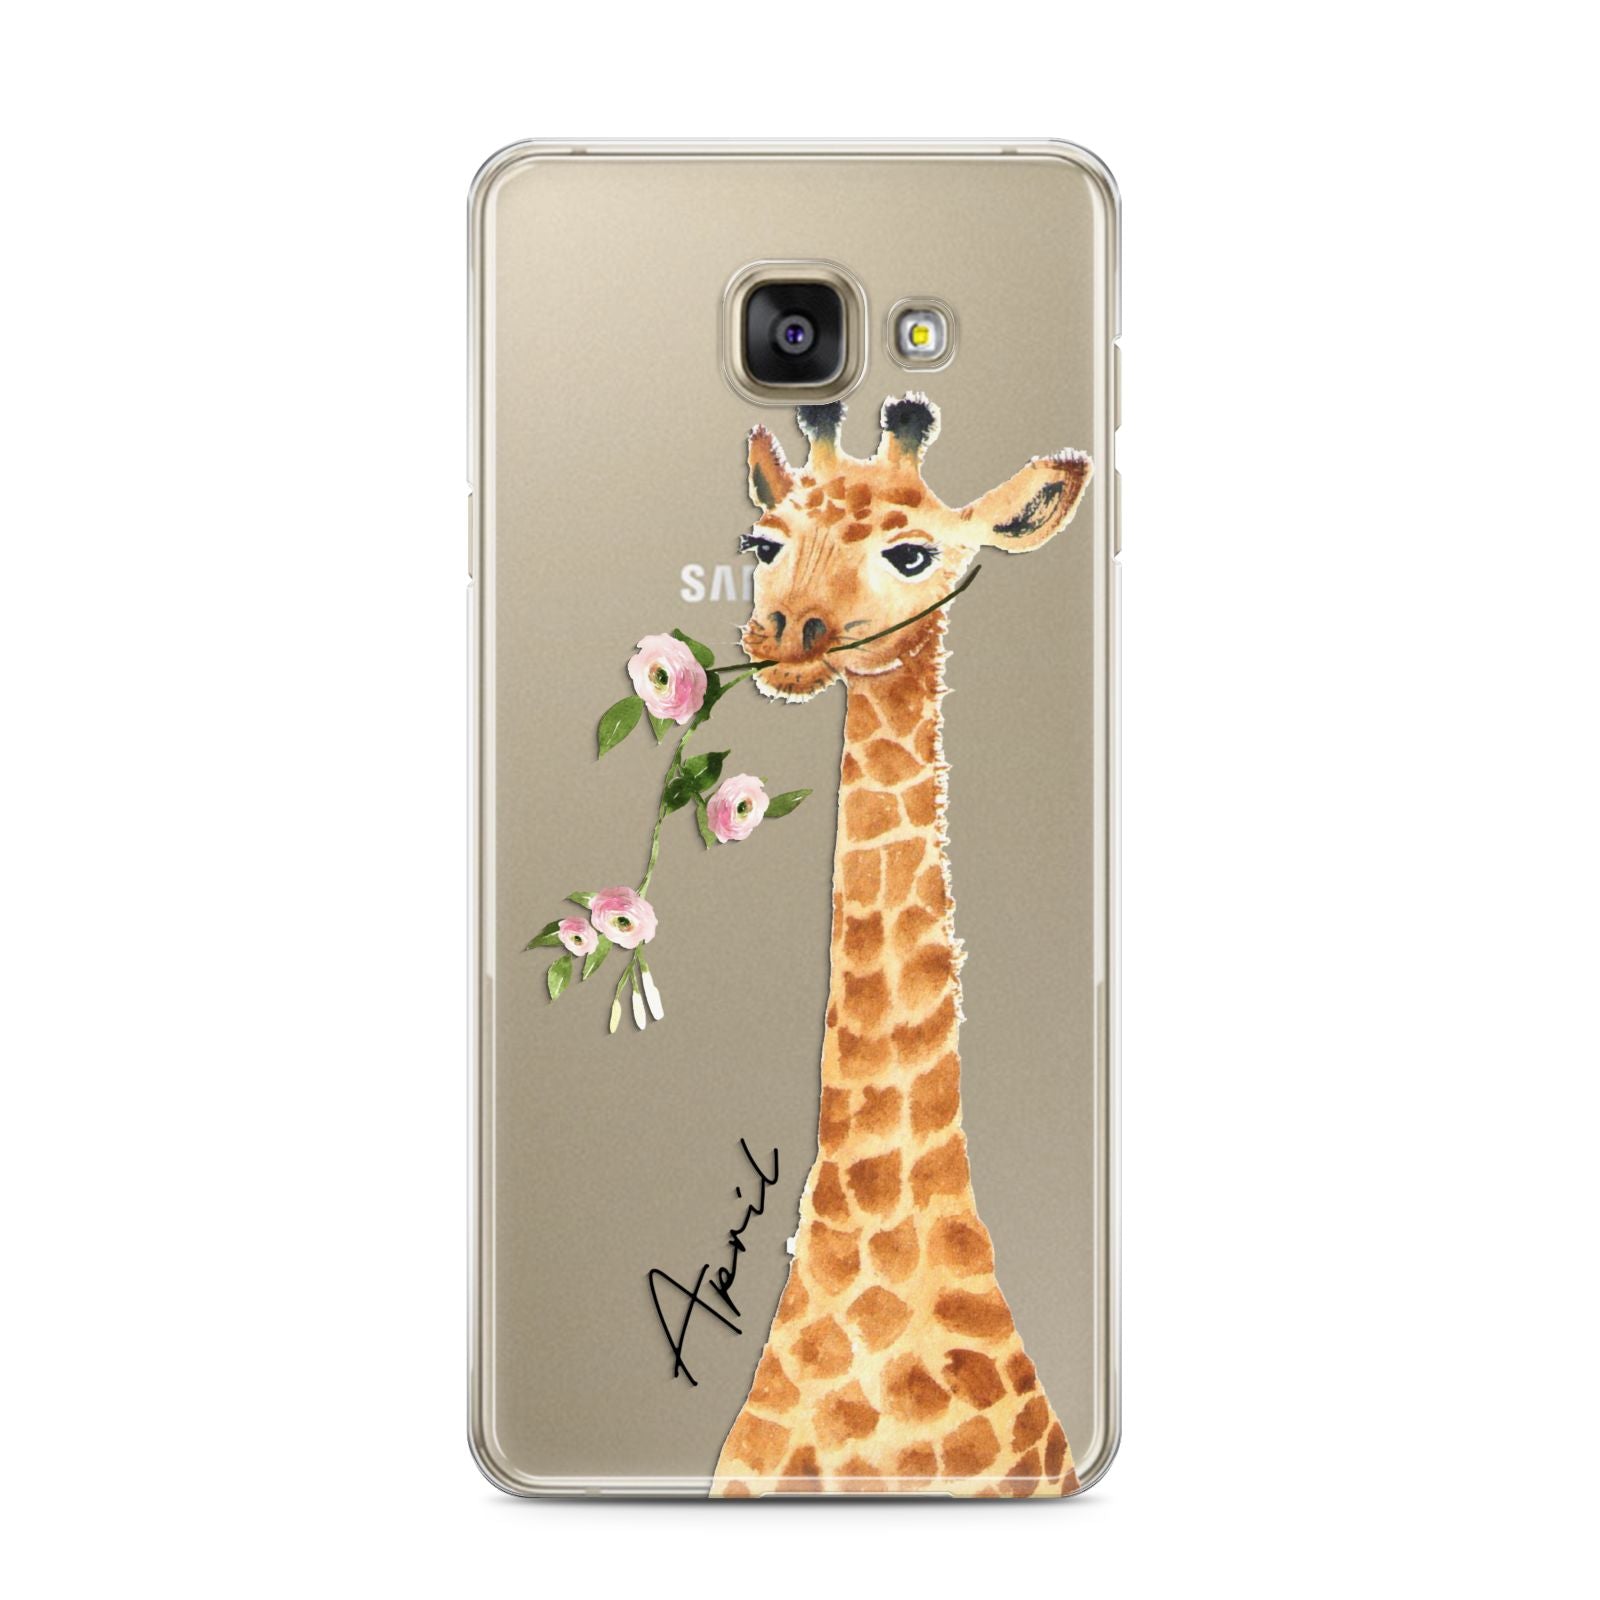 Personalised Giraffe with Name Samsung Galaxy A3 2016 Case on gold phone